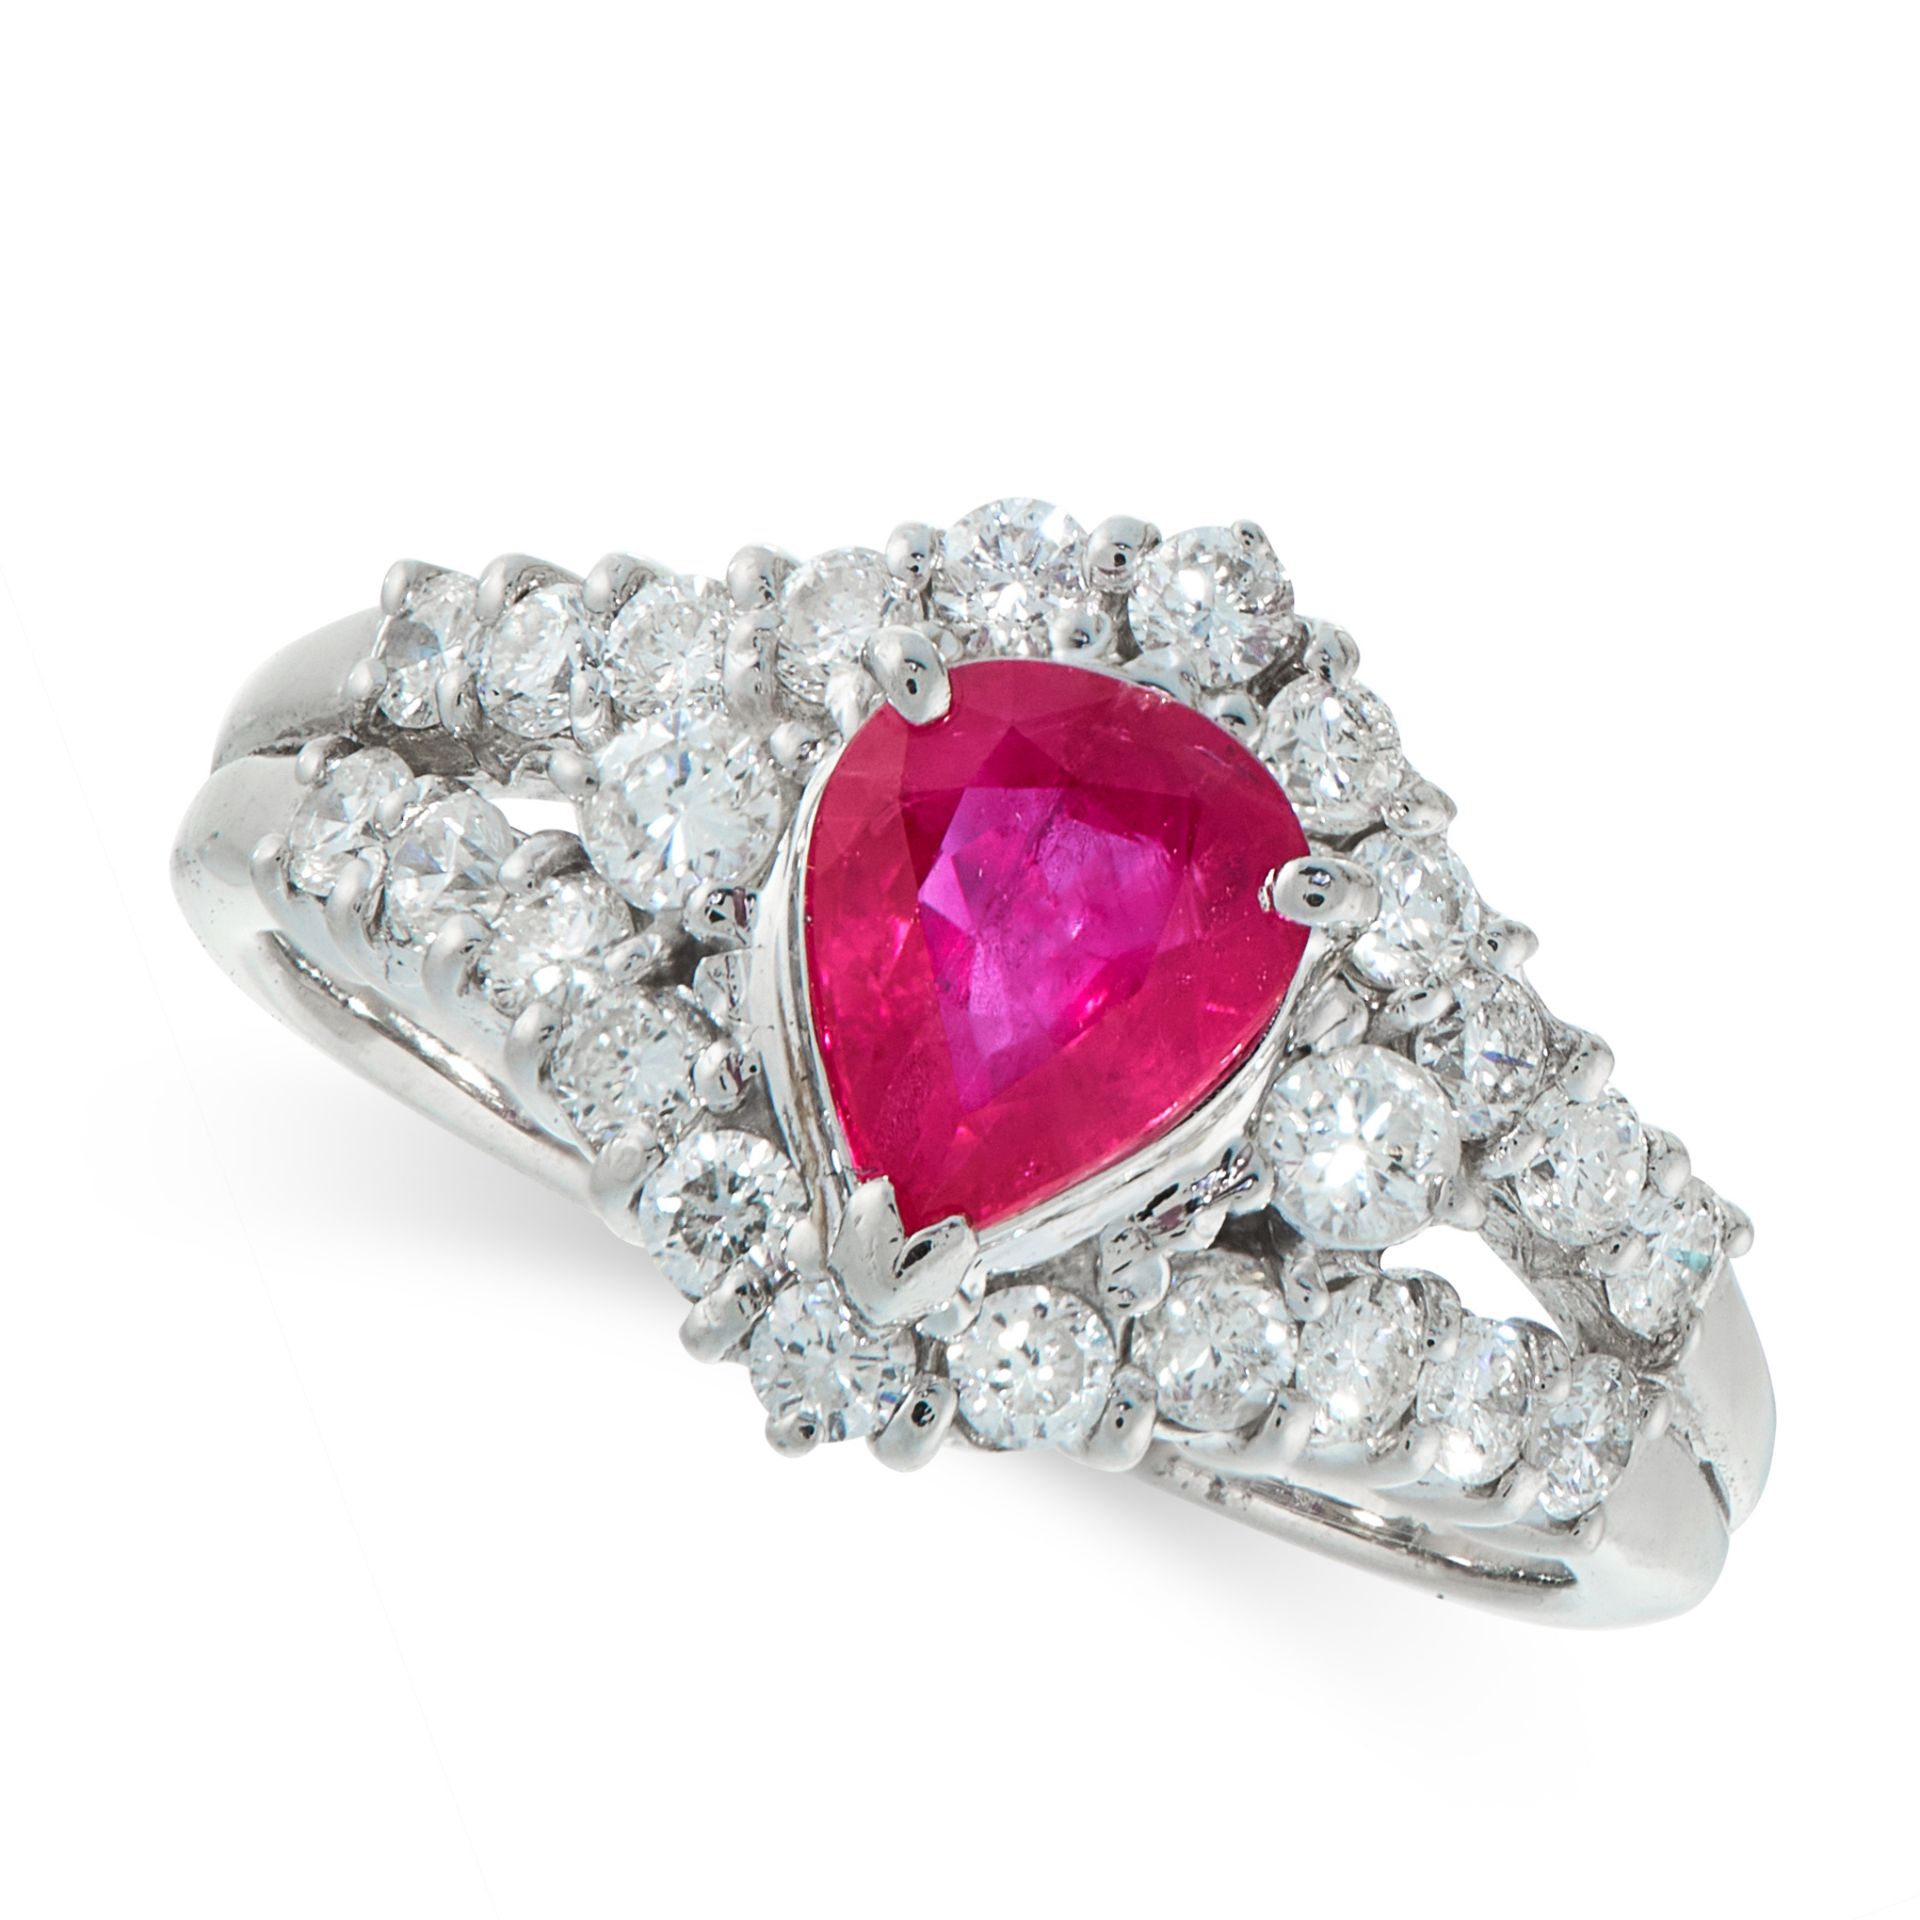 A RUBY AND DIAMOND RING claw-set with a pear-shaped ruby of 1.02 carats, the border and shoulders